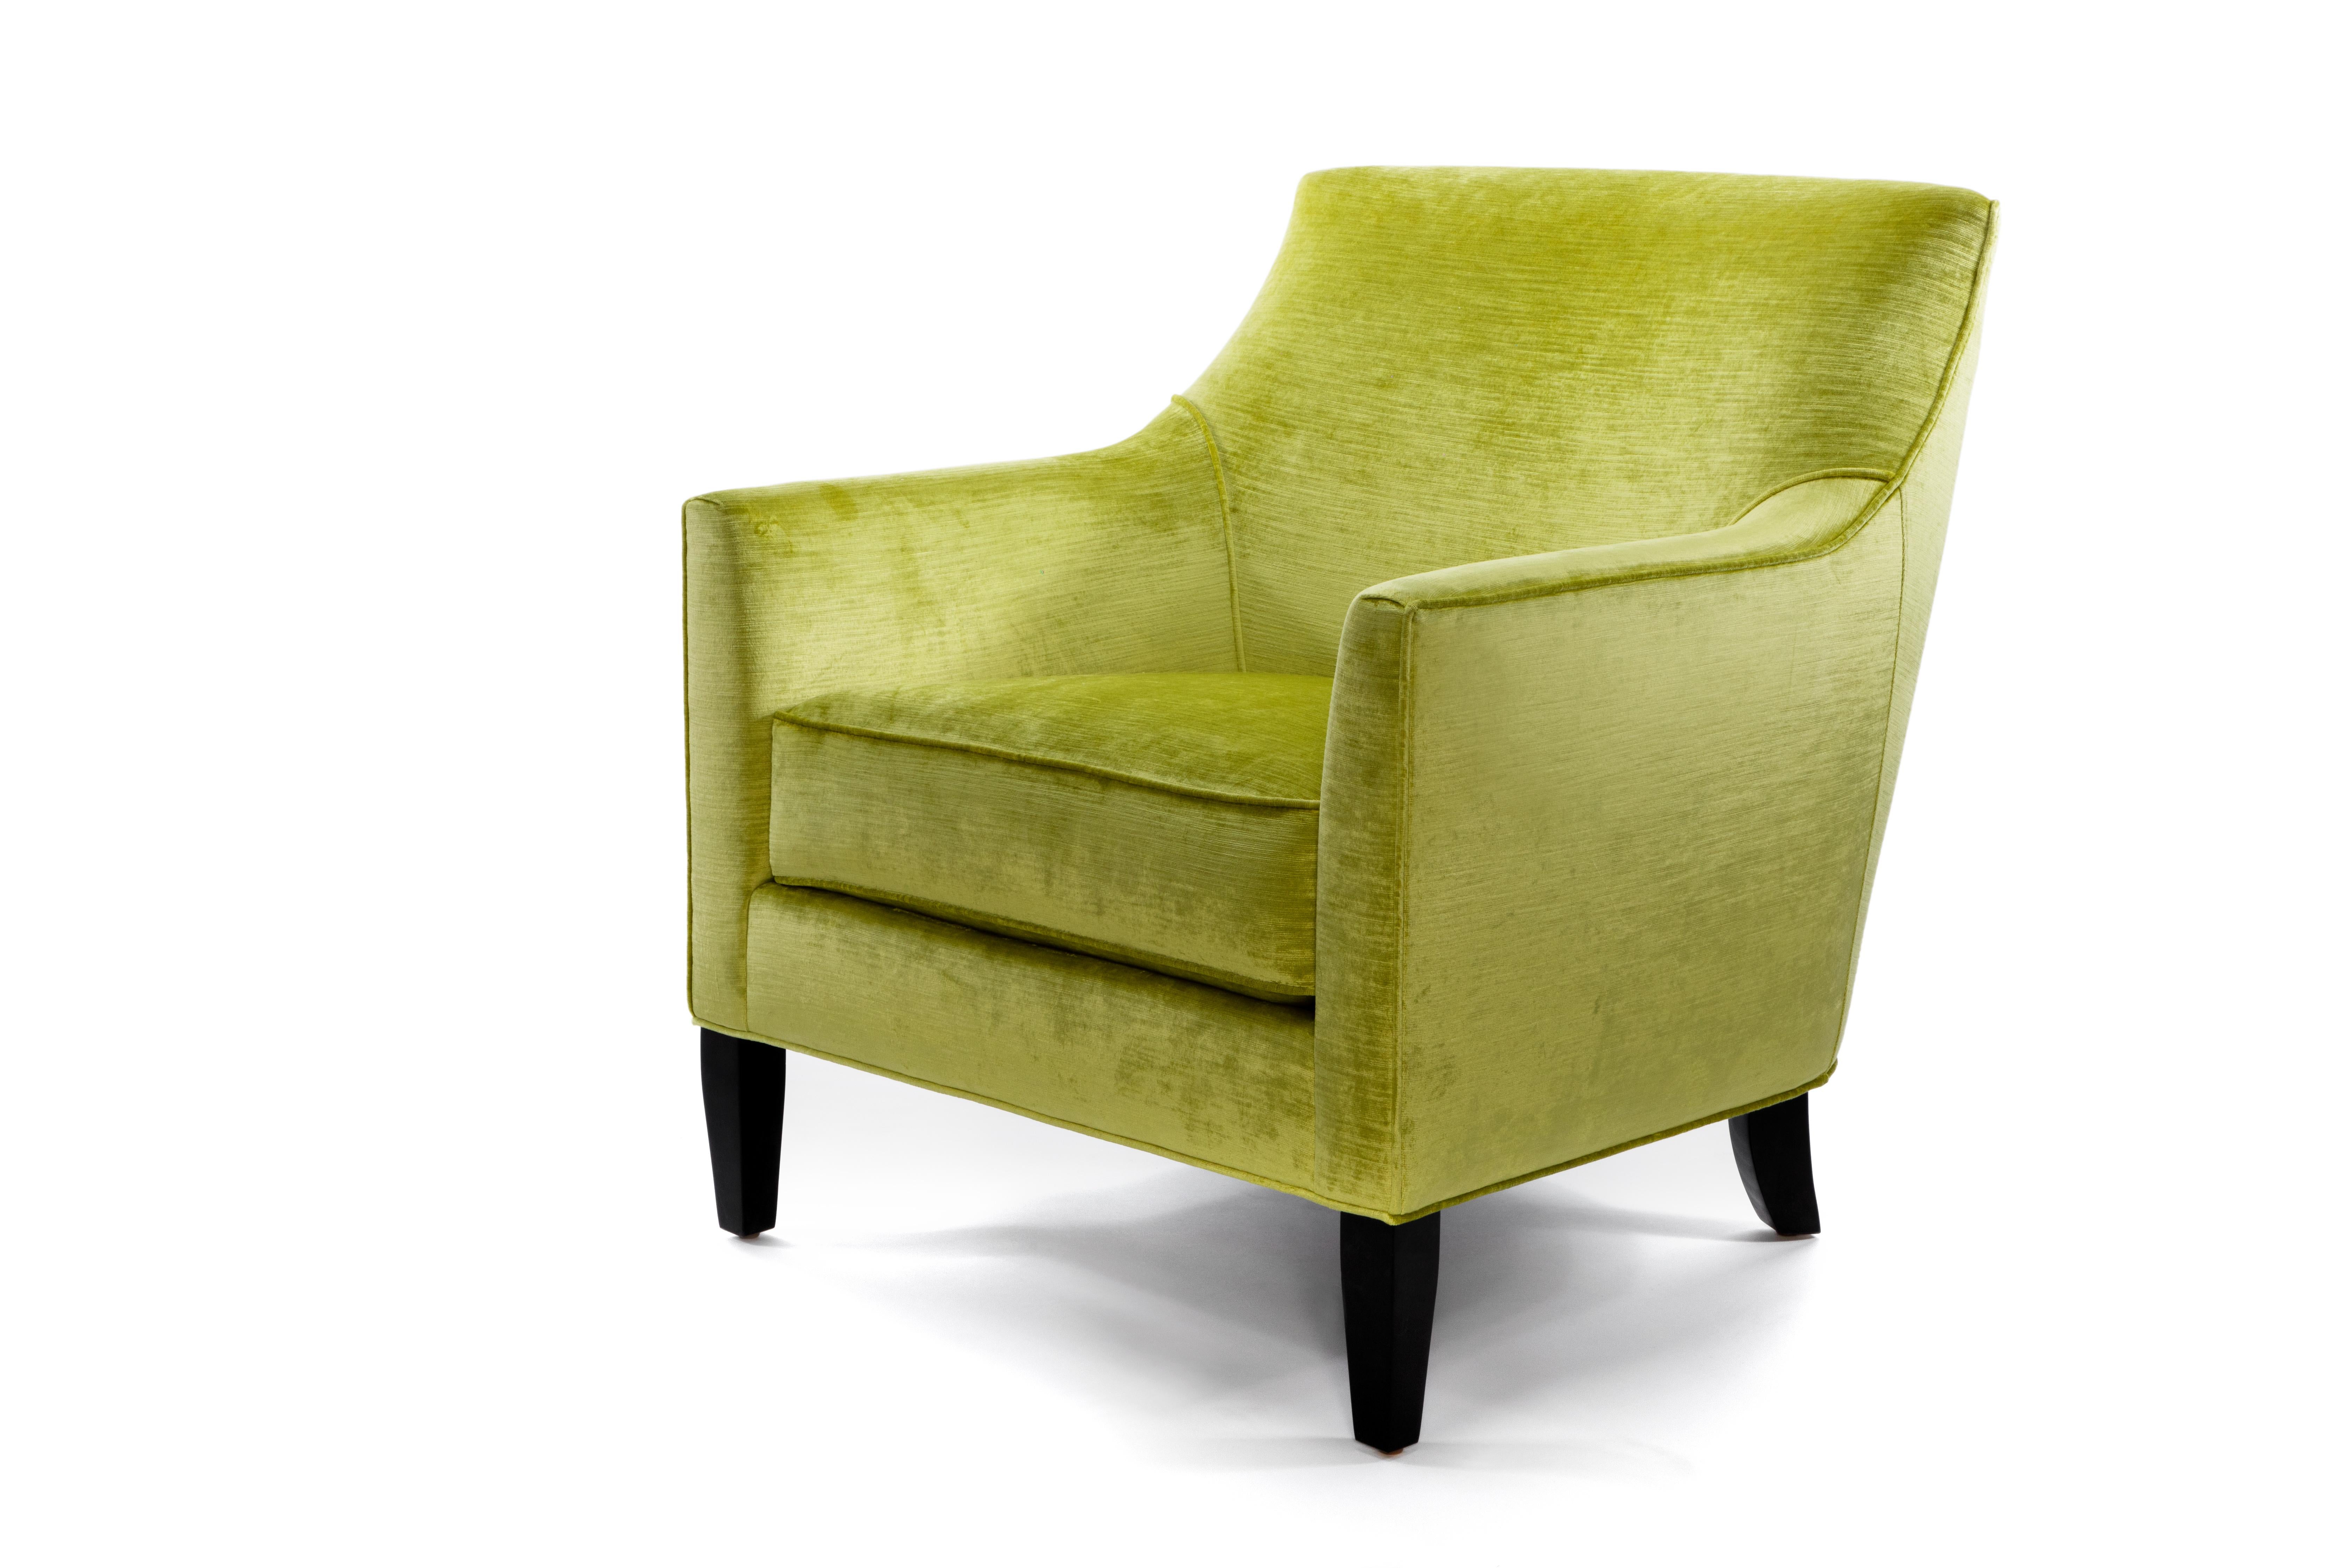 Meet Lucia, our comfortable, reliable, girl next door. Designed with traditional and contemporary elements, she works to compliment any space. Whether alone or in a pair, Lucia invites you to enjoy her as a familiar friend.

Shown in citron velvet